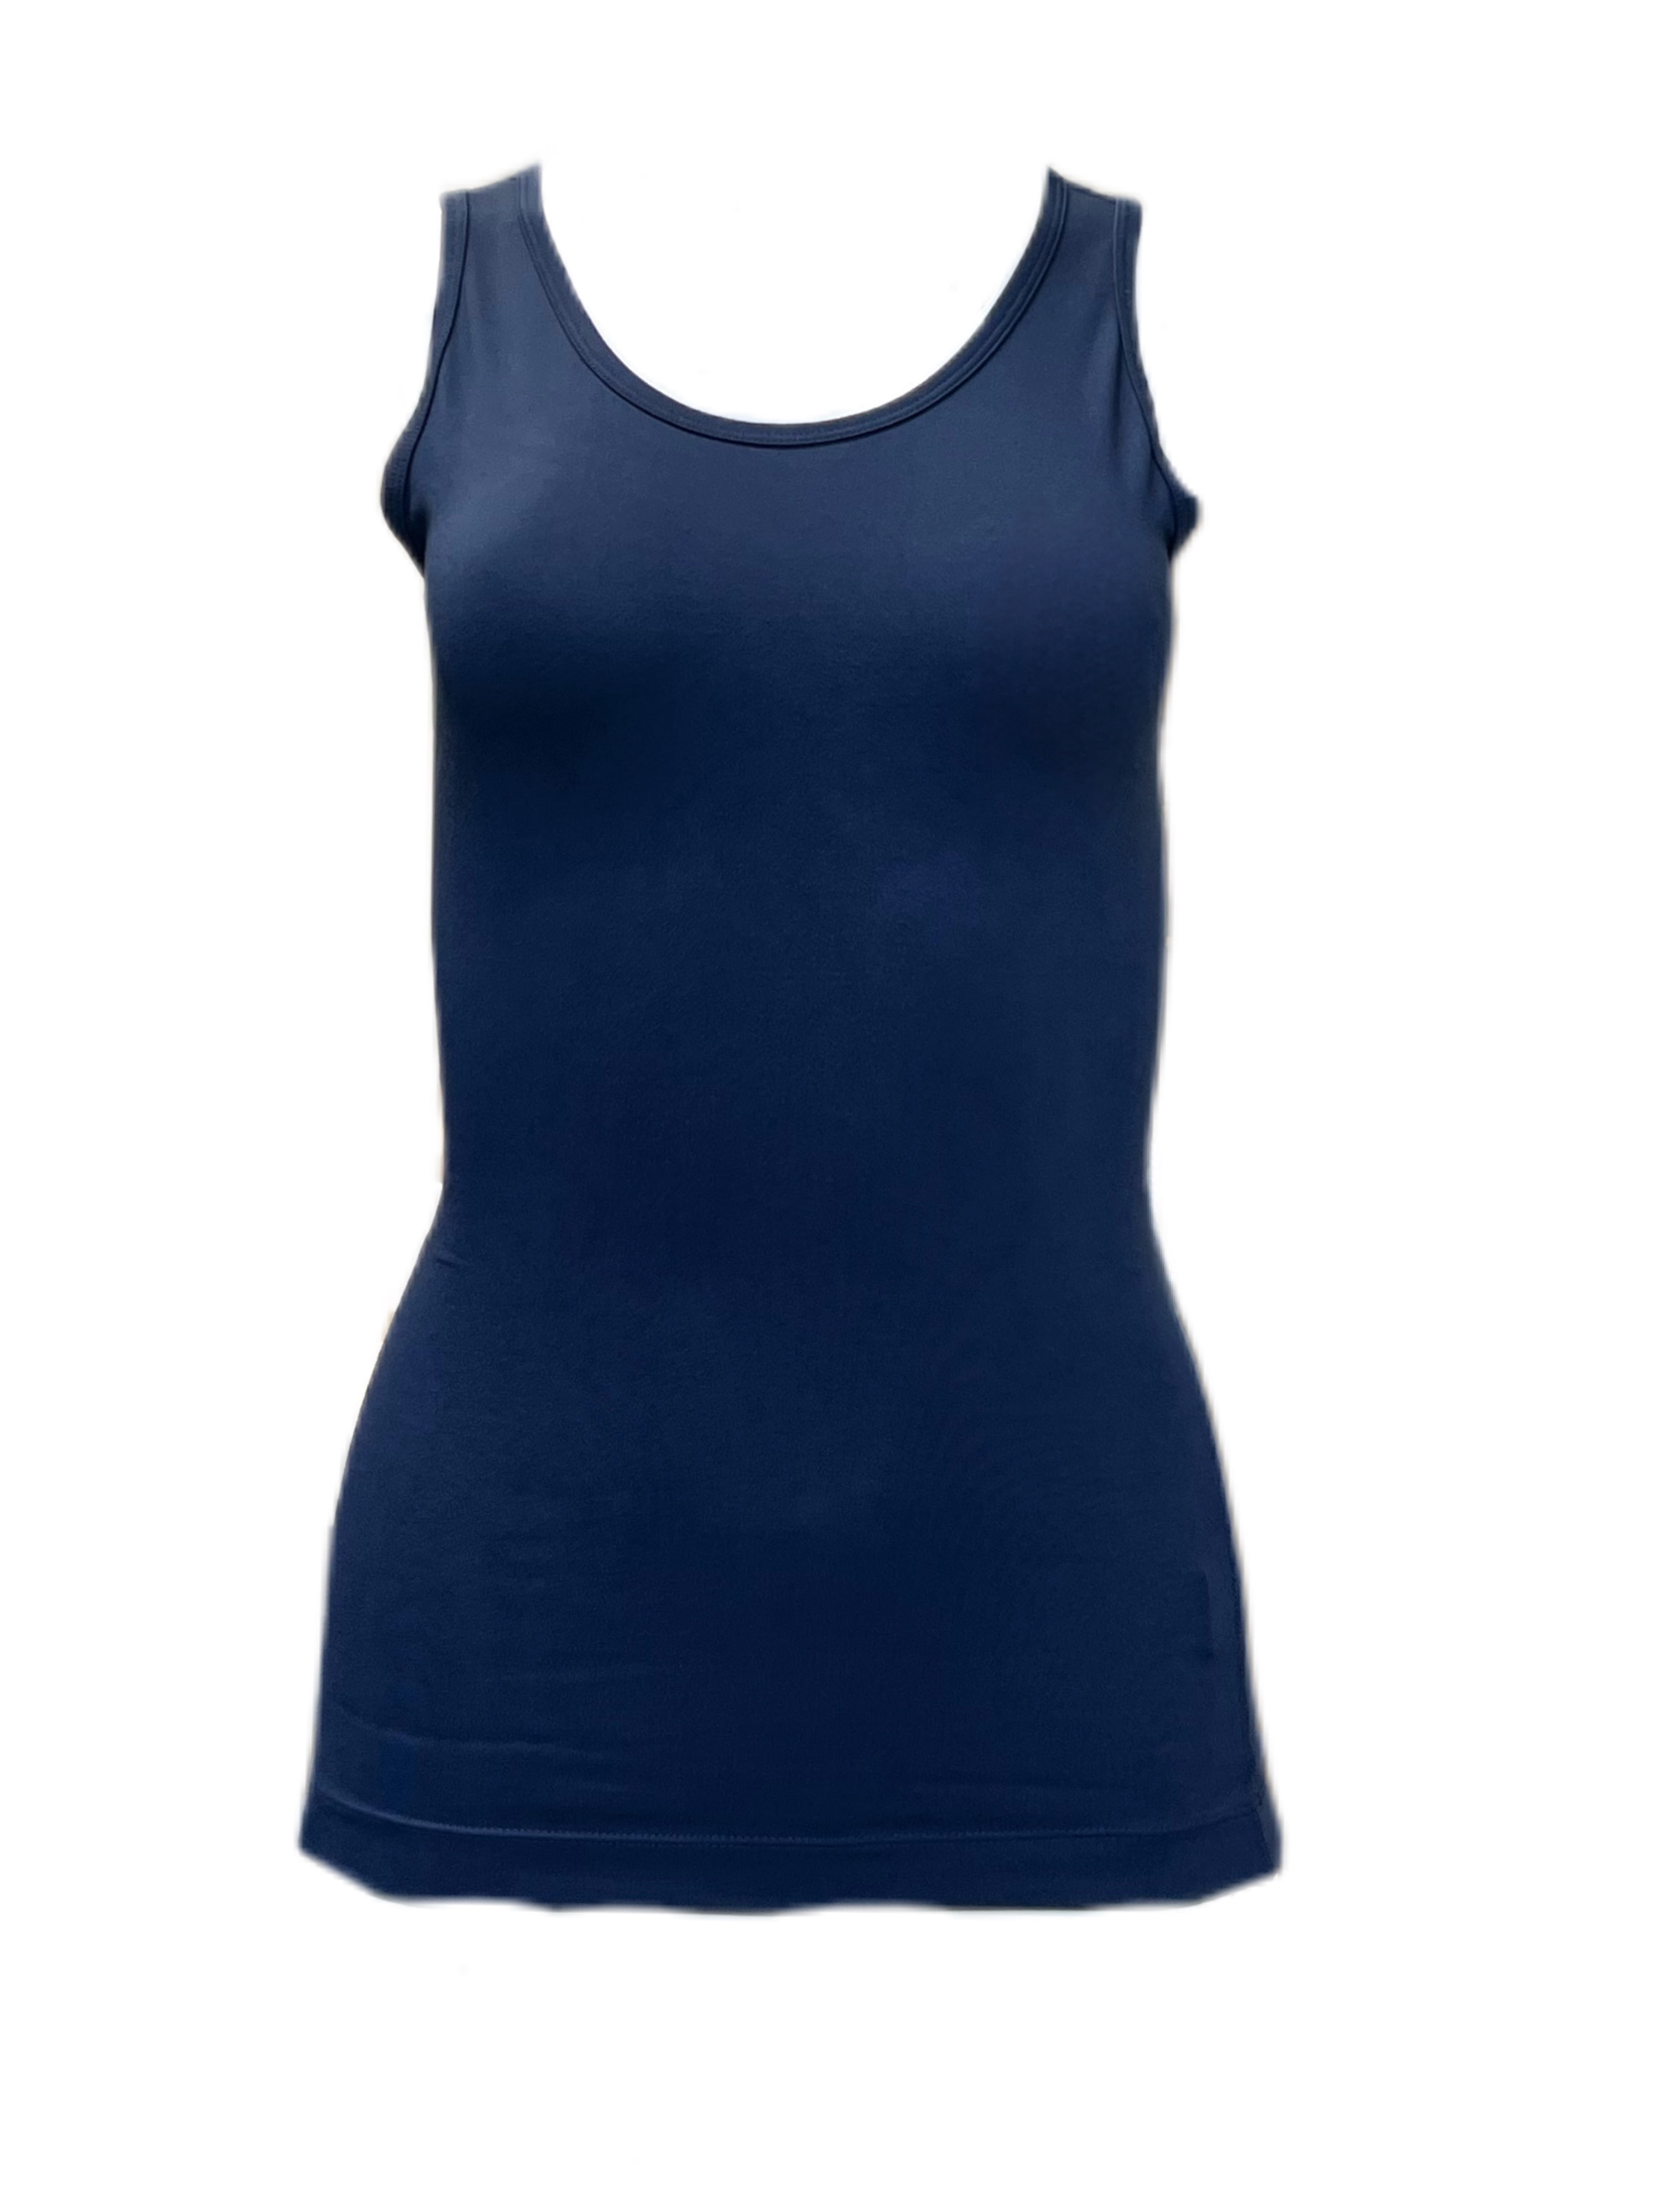 TOMMIE COPPER Women's Lower Back Support Tank Top, Navy, Small 